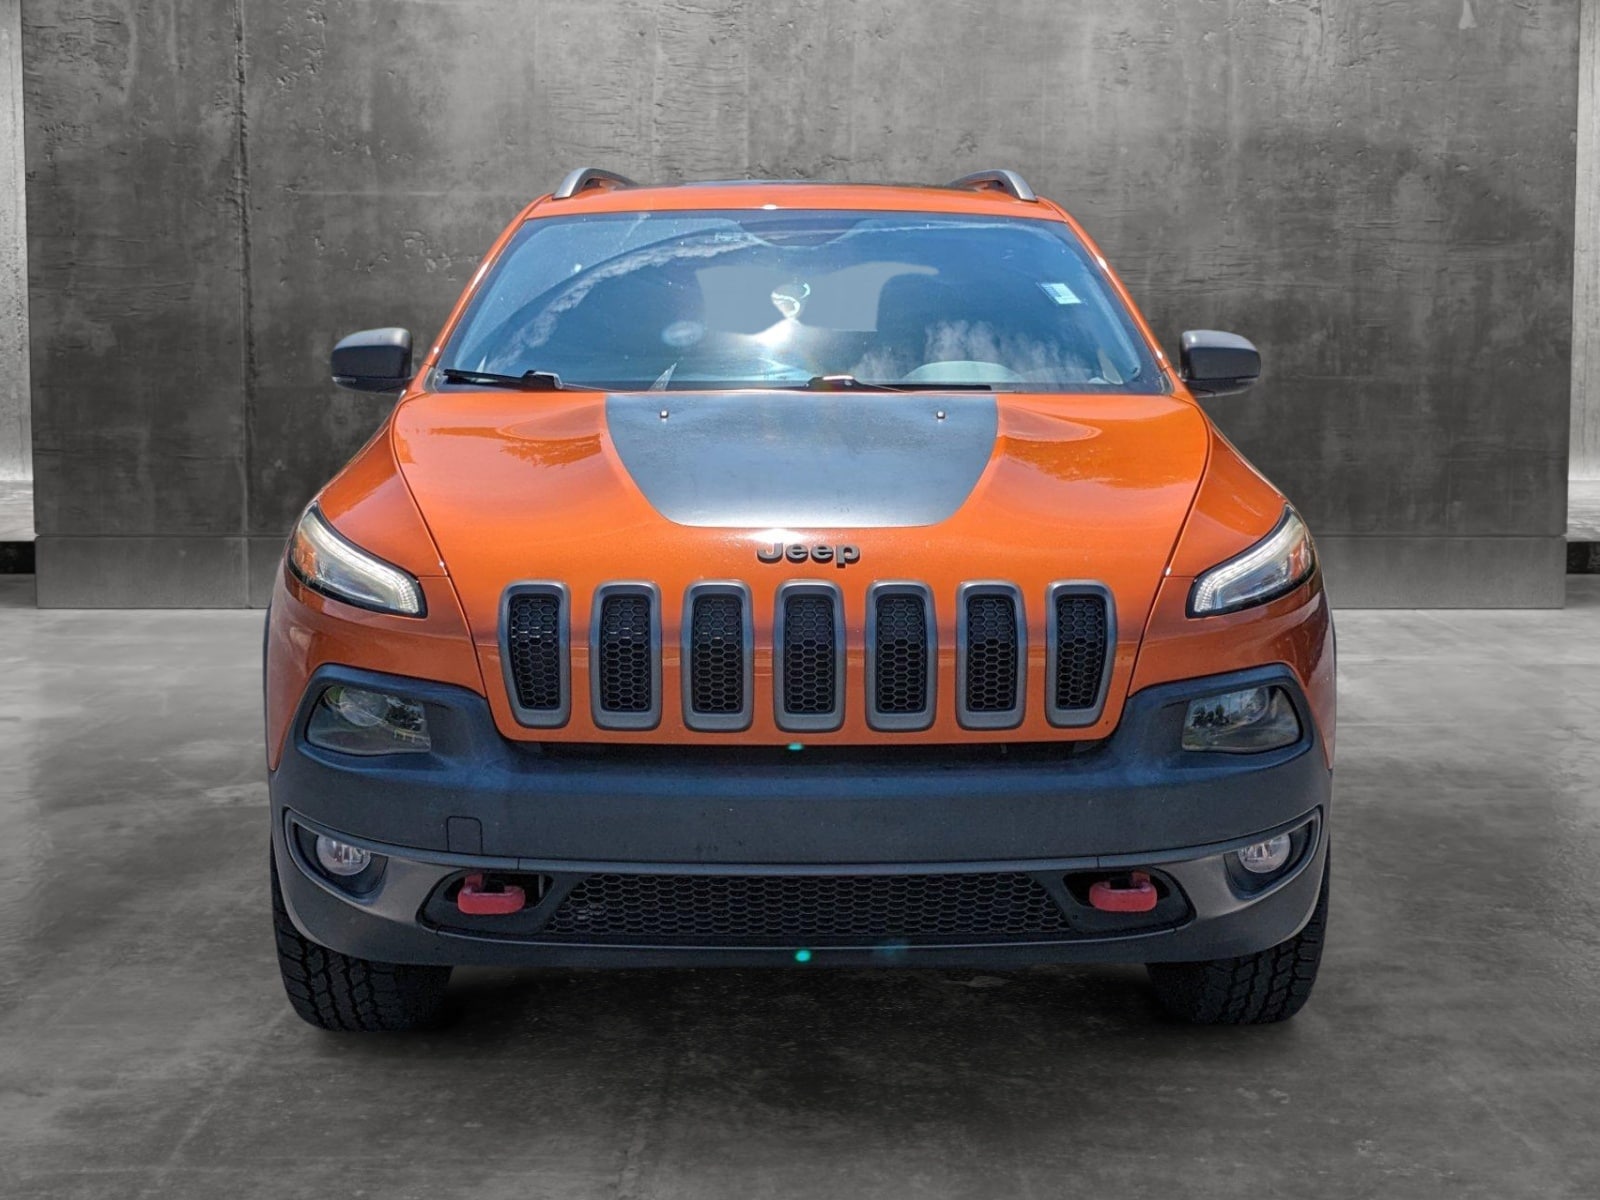 Used 2016 Jeep Cherokee Trailhawk with VIN 1C4PJMBS1GW112833 for sale in Sanford, FL